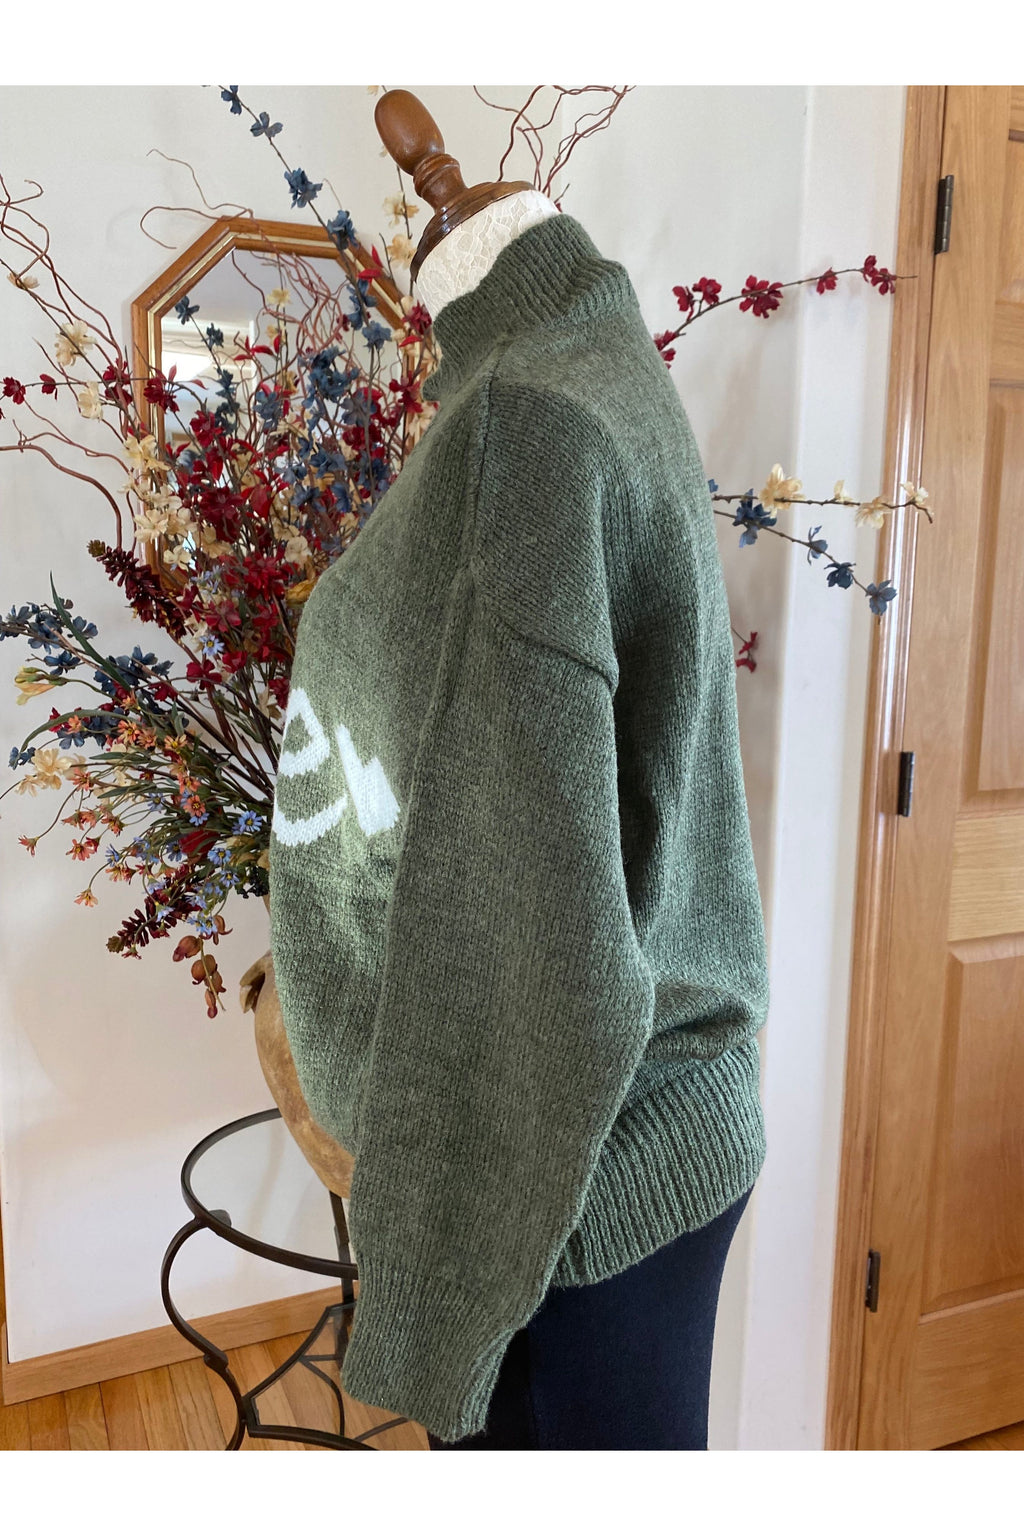 Bella Amore - Ribbed Neck and Bottom "Smile" Sweater - Olive - 0222